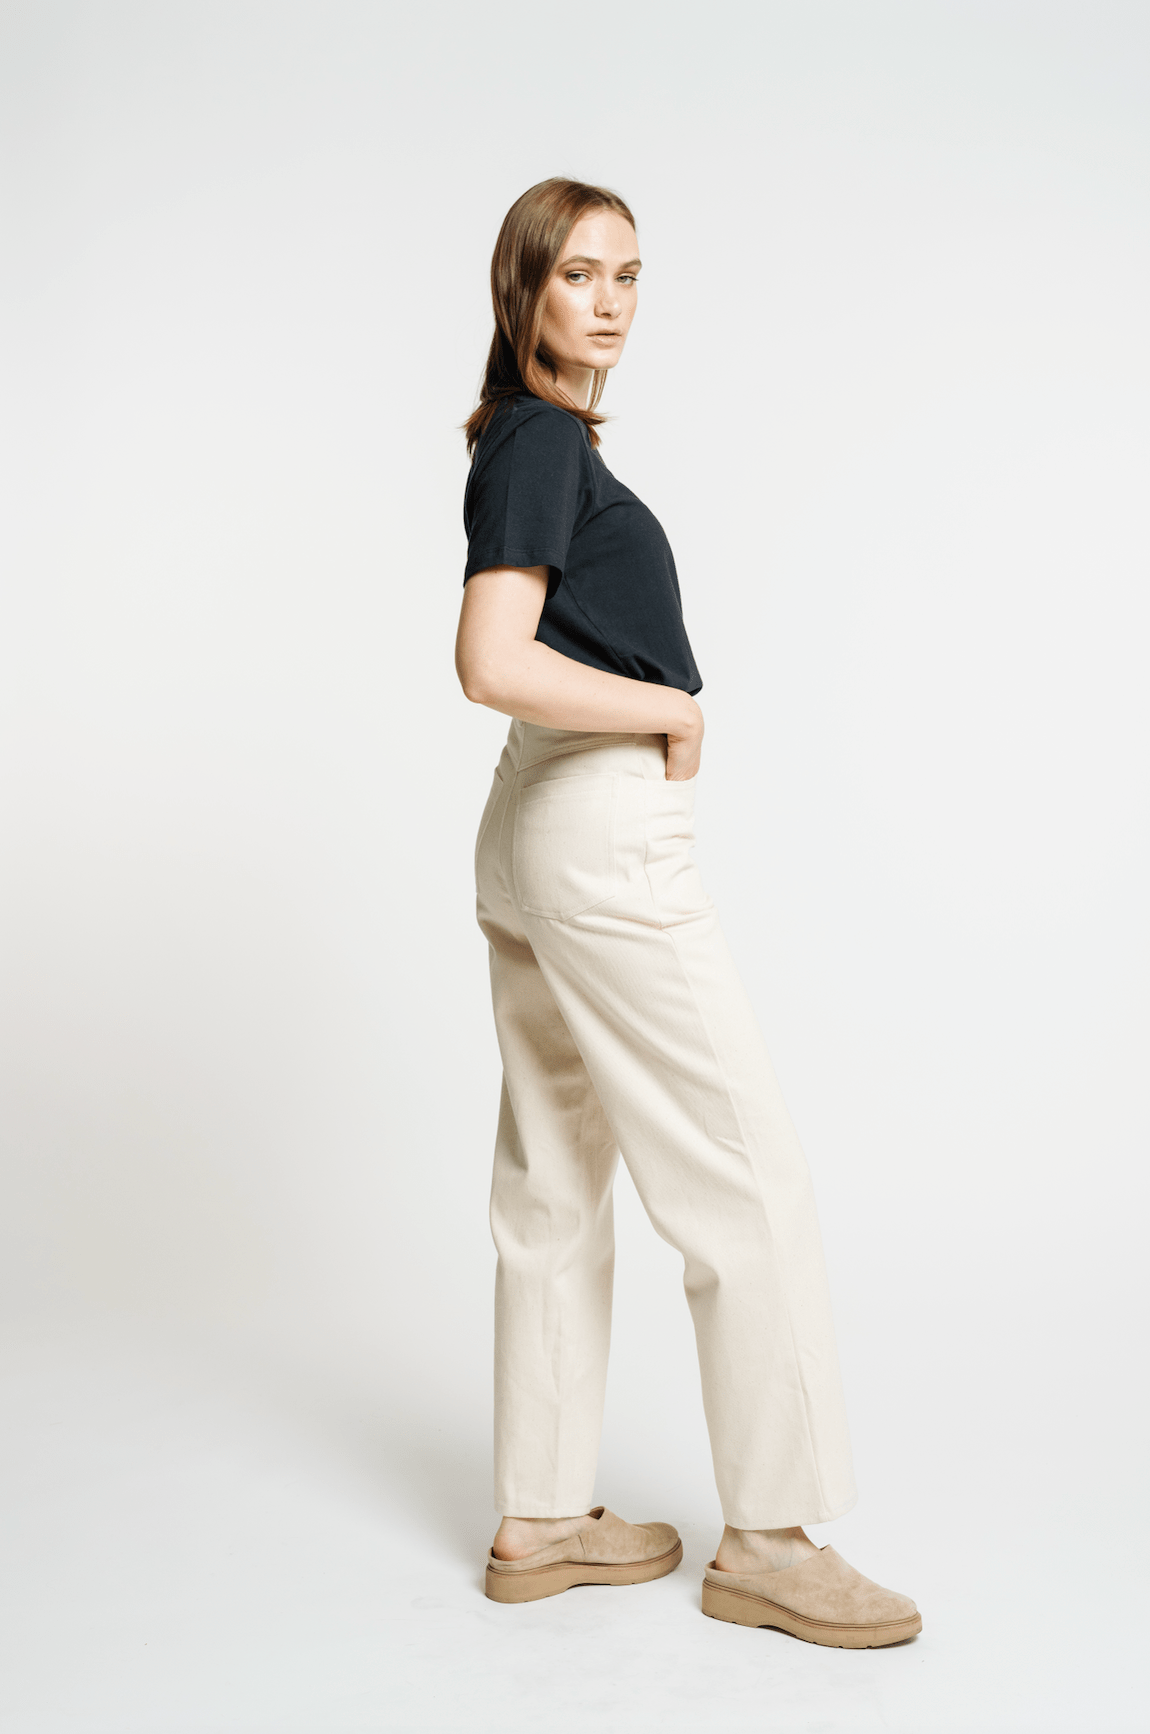 The model is wearing a black t-shirt and beige pants, accessorized with handcrafted details on the Camp Pant - Bone - Sample.